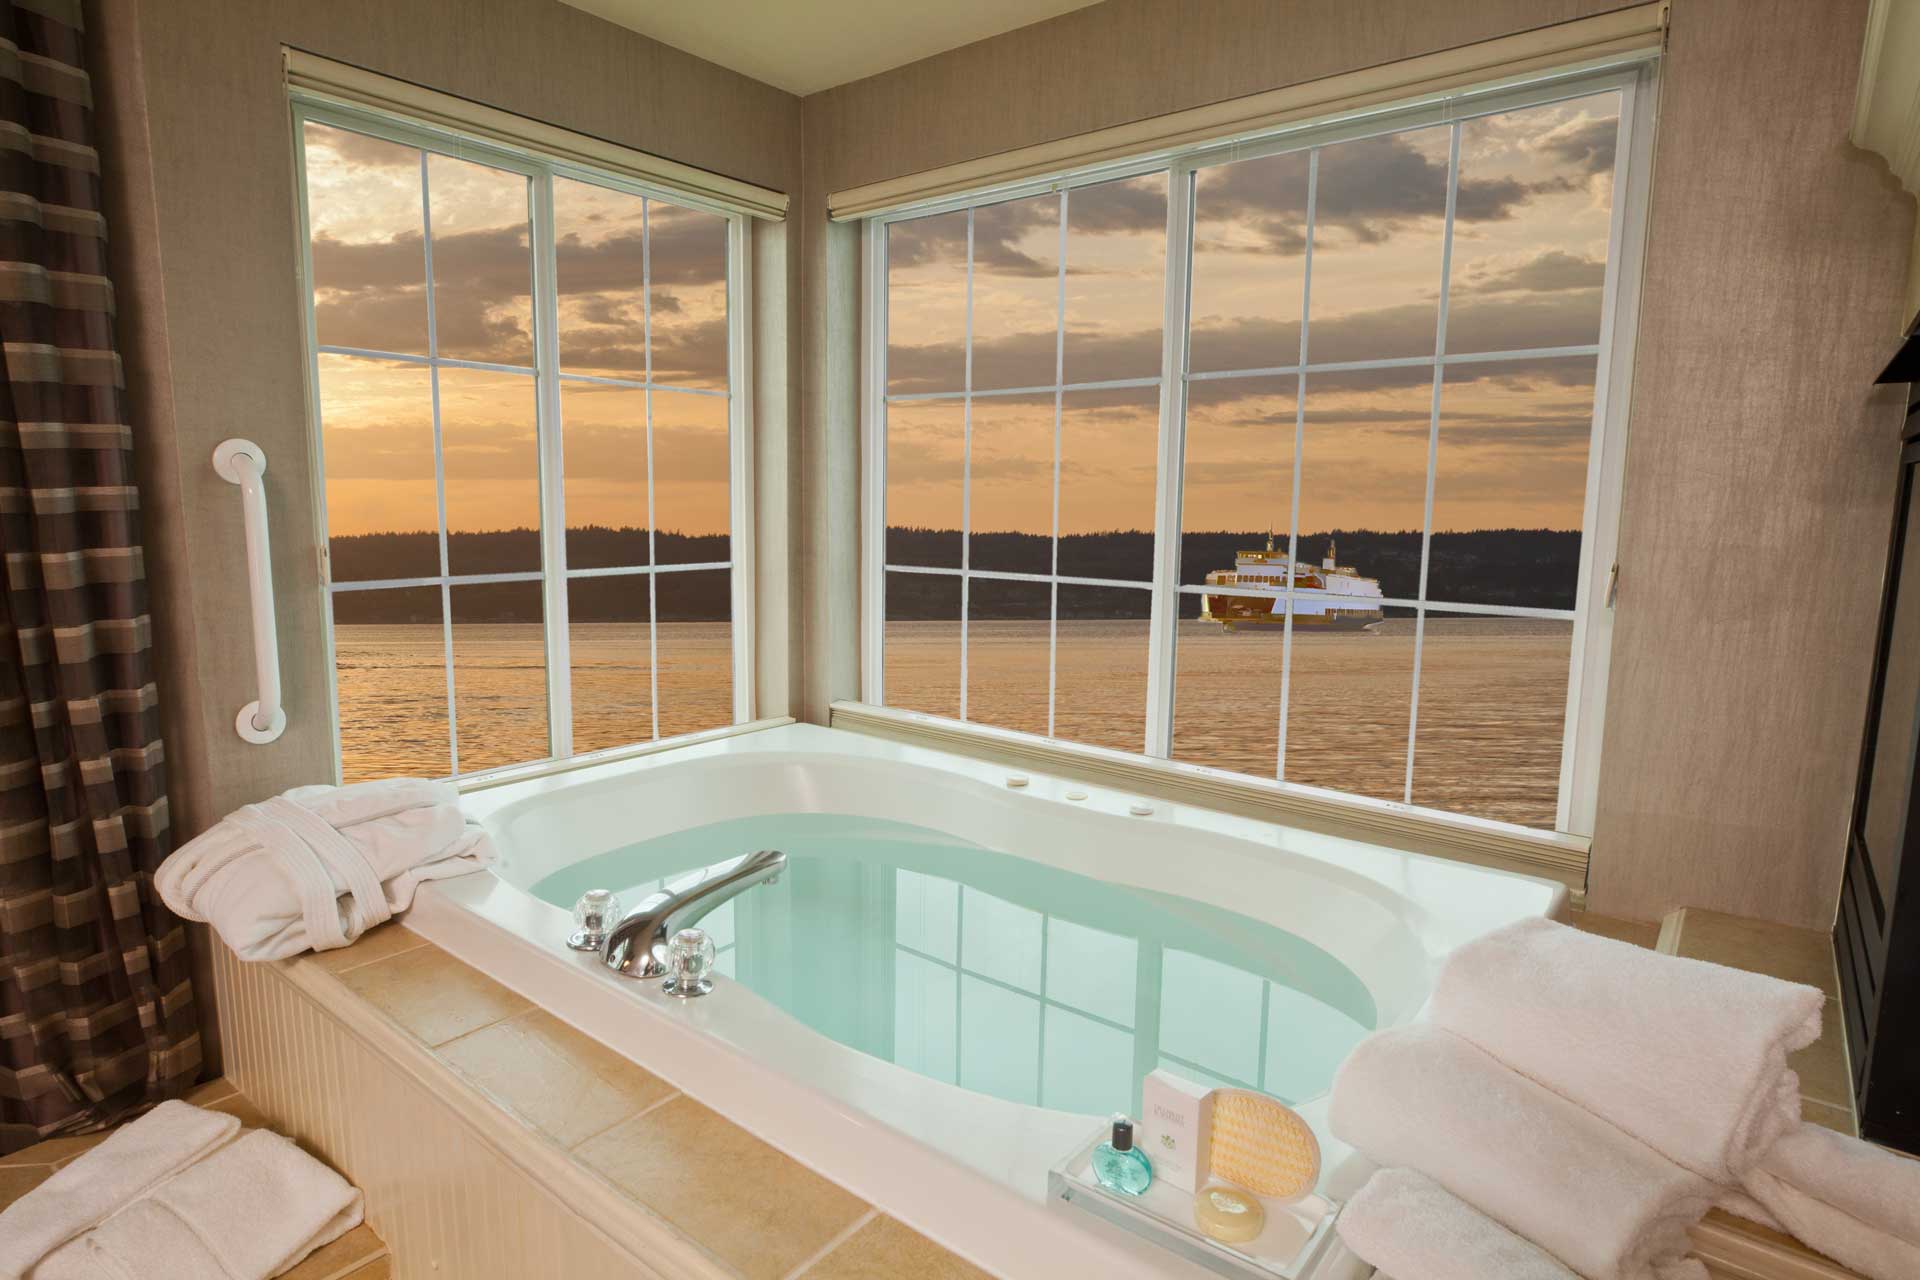 King Room with a view and jacuzzi at Silver Cloud Hotel – Mukilteo Waterfront.